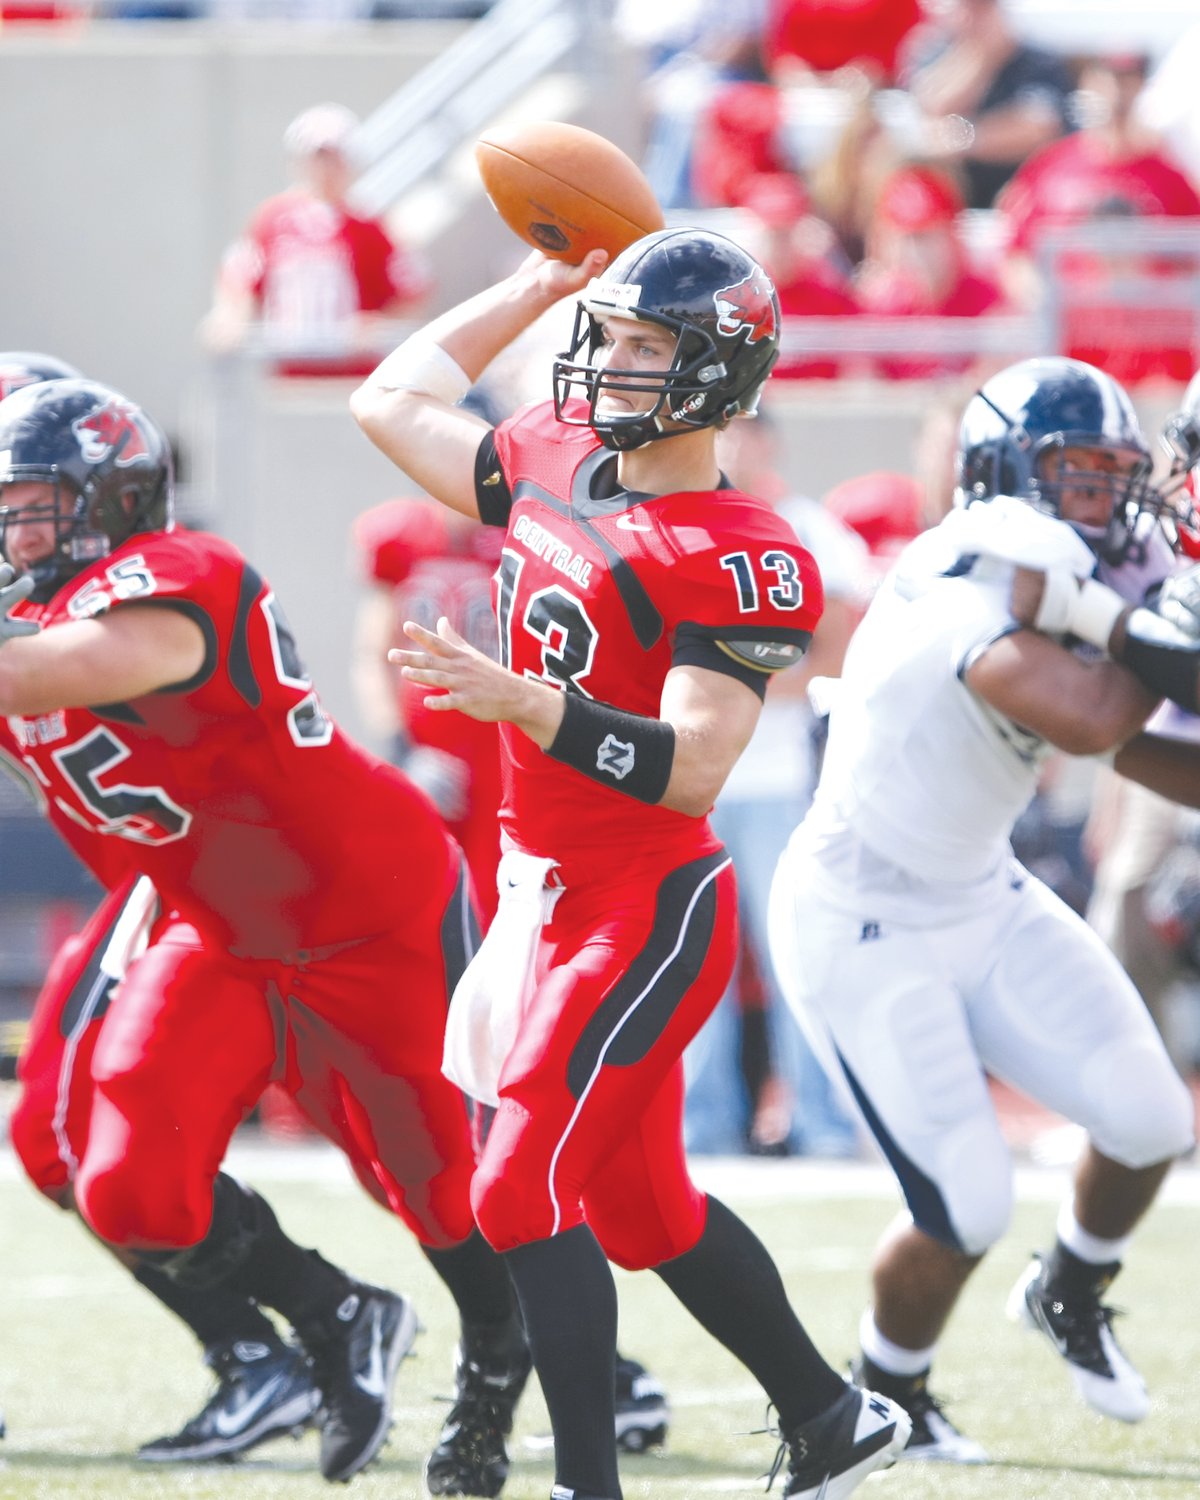 Montgomery County High graduate Eric Czerniewski tosses a pass while playing for the University of Central Missouri football team. Czerniewski was inducted into the Missouri Sports Hall of Fame on Oct. 20. [Submitted photo]